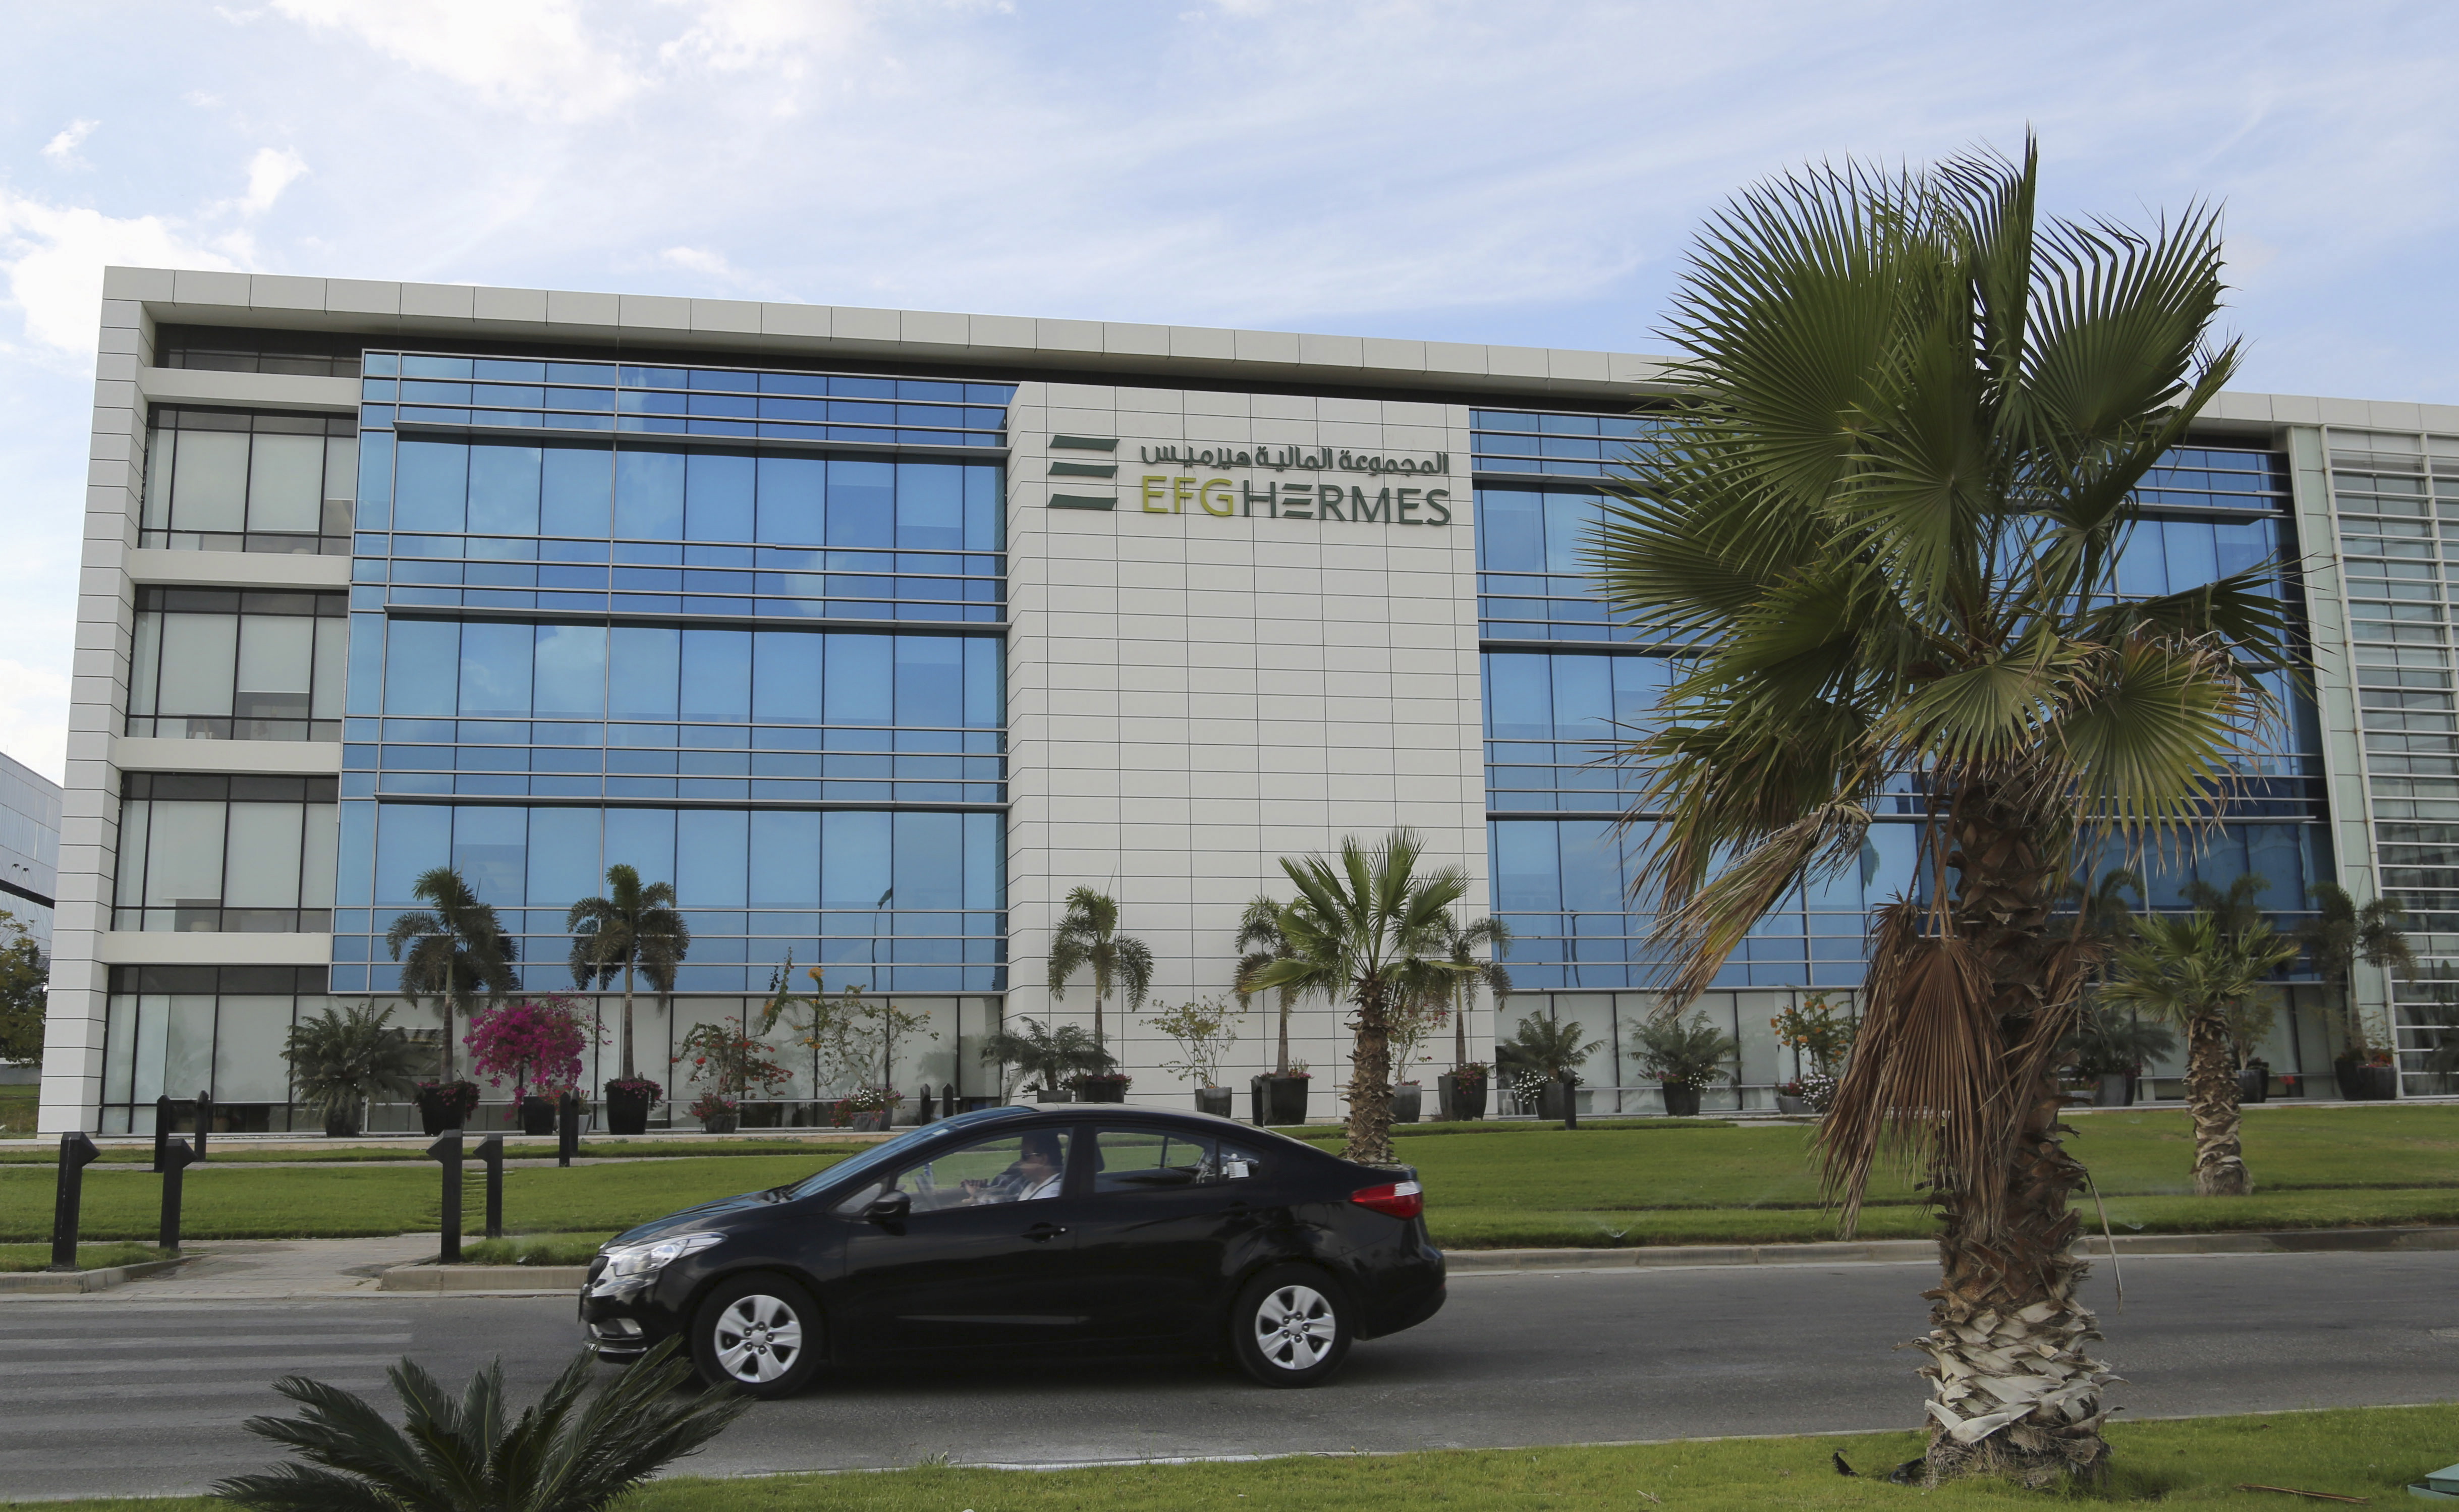 The building of EFG-Hermes, also known as Egyptian Financial Group Hermes Holding Co SAE, is seen at the Smart Village in the outskirts of Cairo